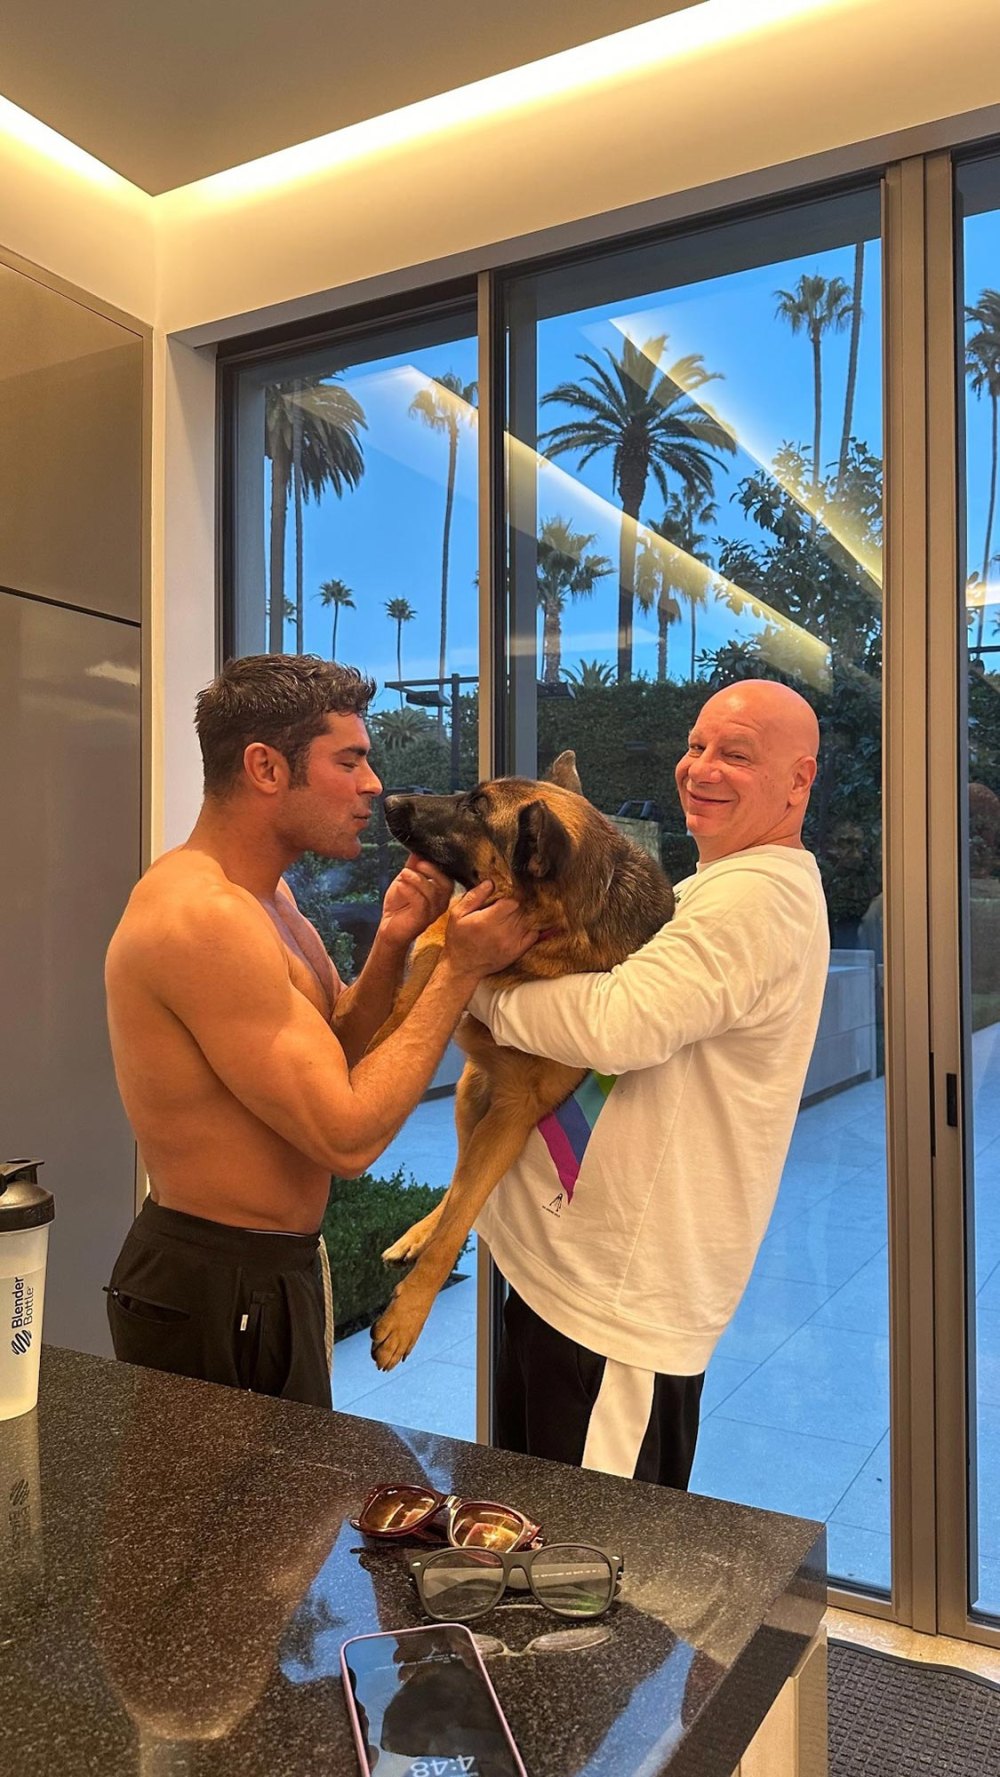 Shirtless Zac Efron Cuddling a Dog Is Exactly What You Need to See to Ward Off Sunday Scaries